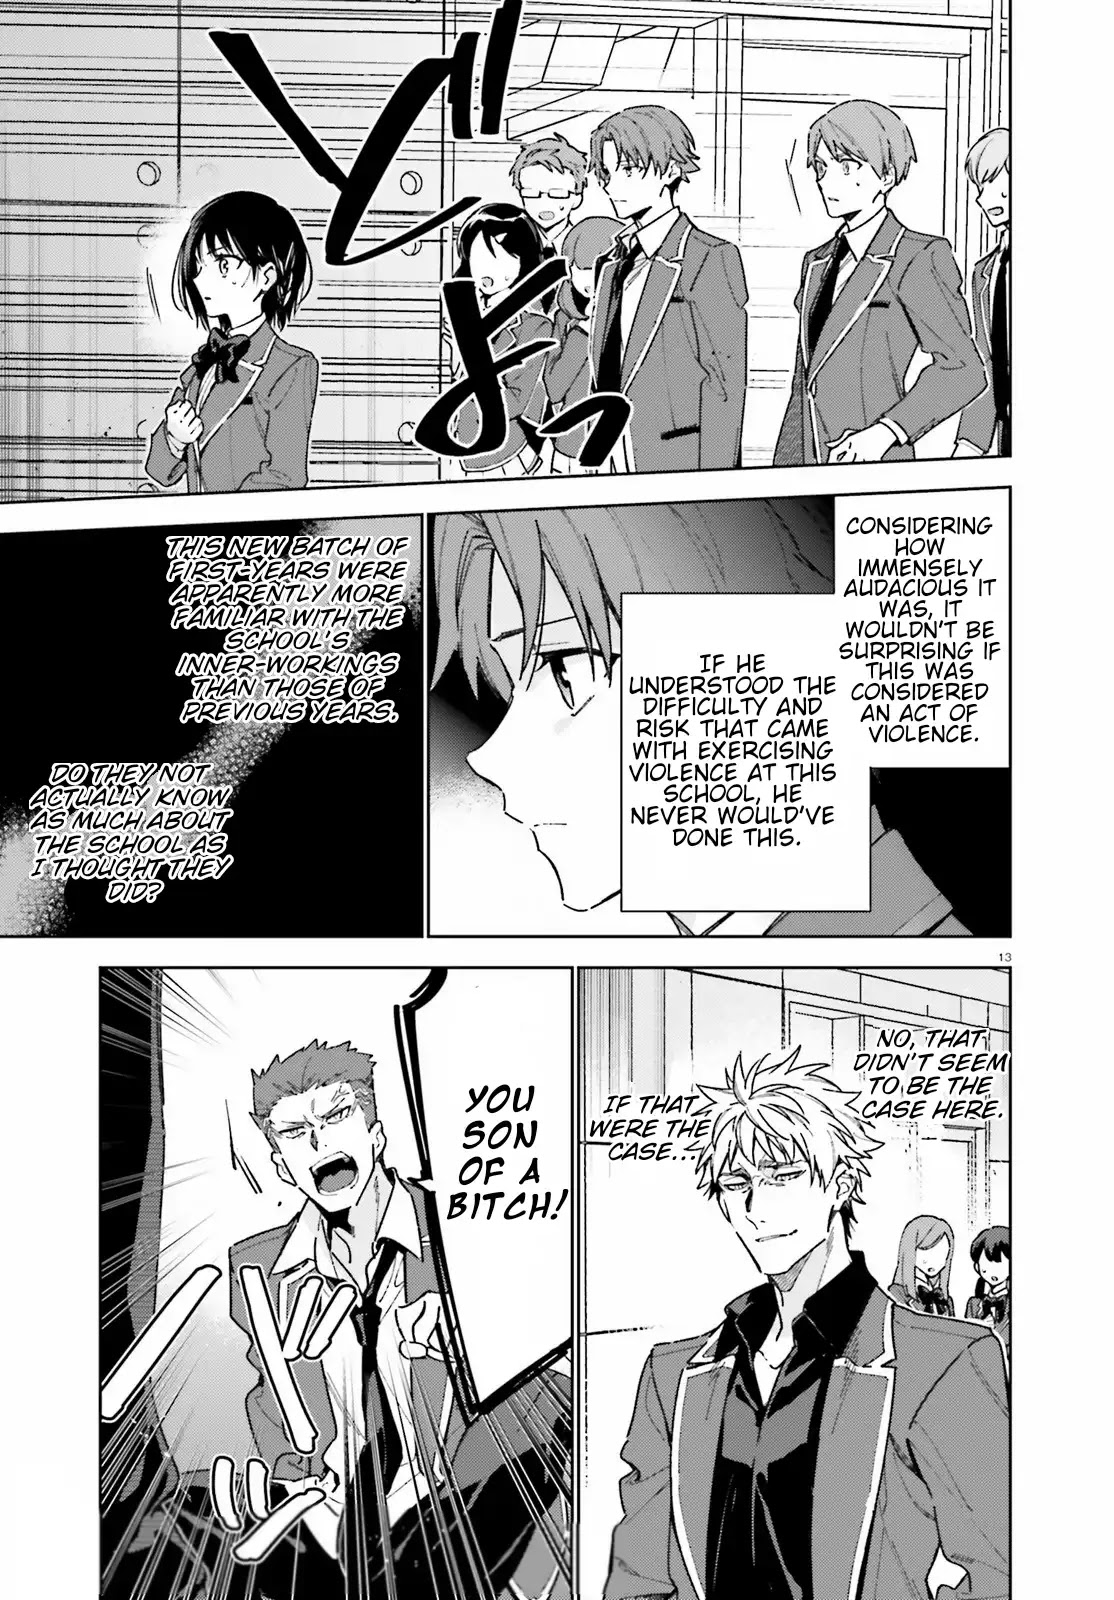 Classroom of the Elite, Chapter 3 - Classroom of the Elite Manga Online